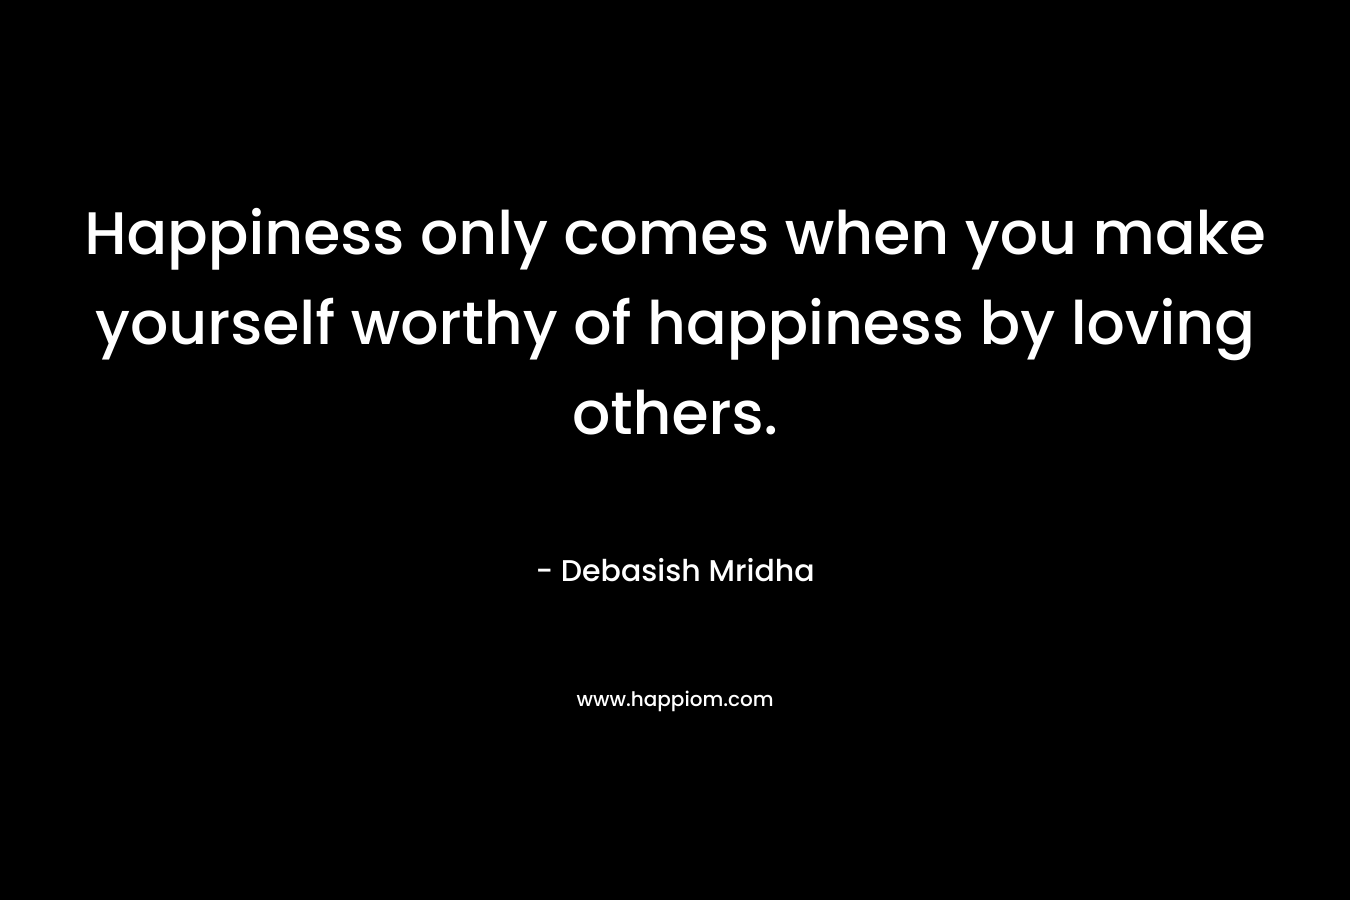 Happiness only comes when you make yourself worthy of happiness by loving others.